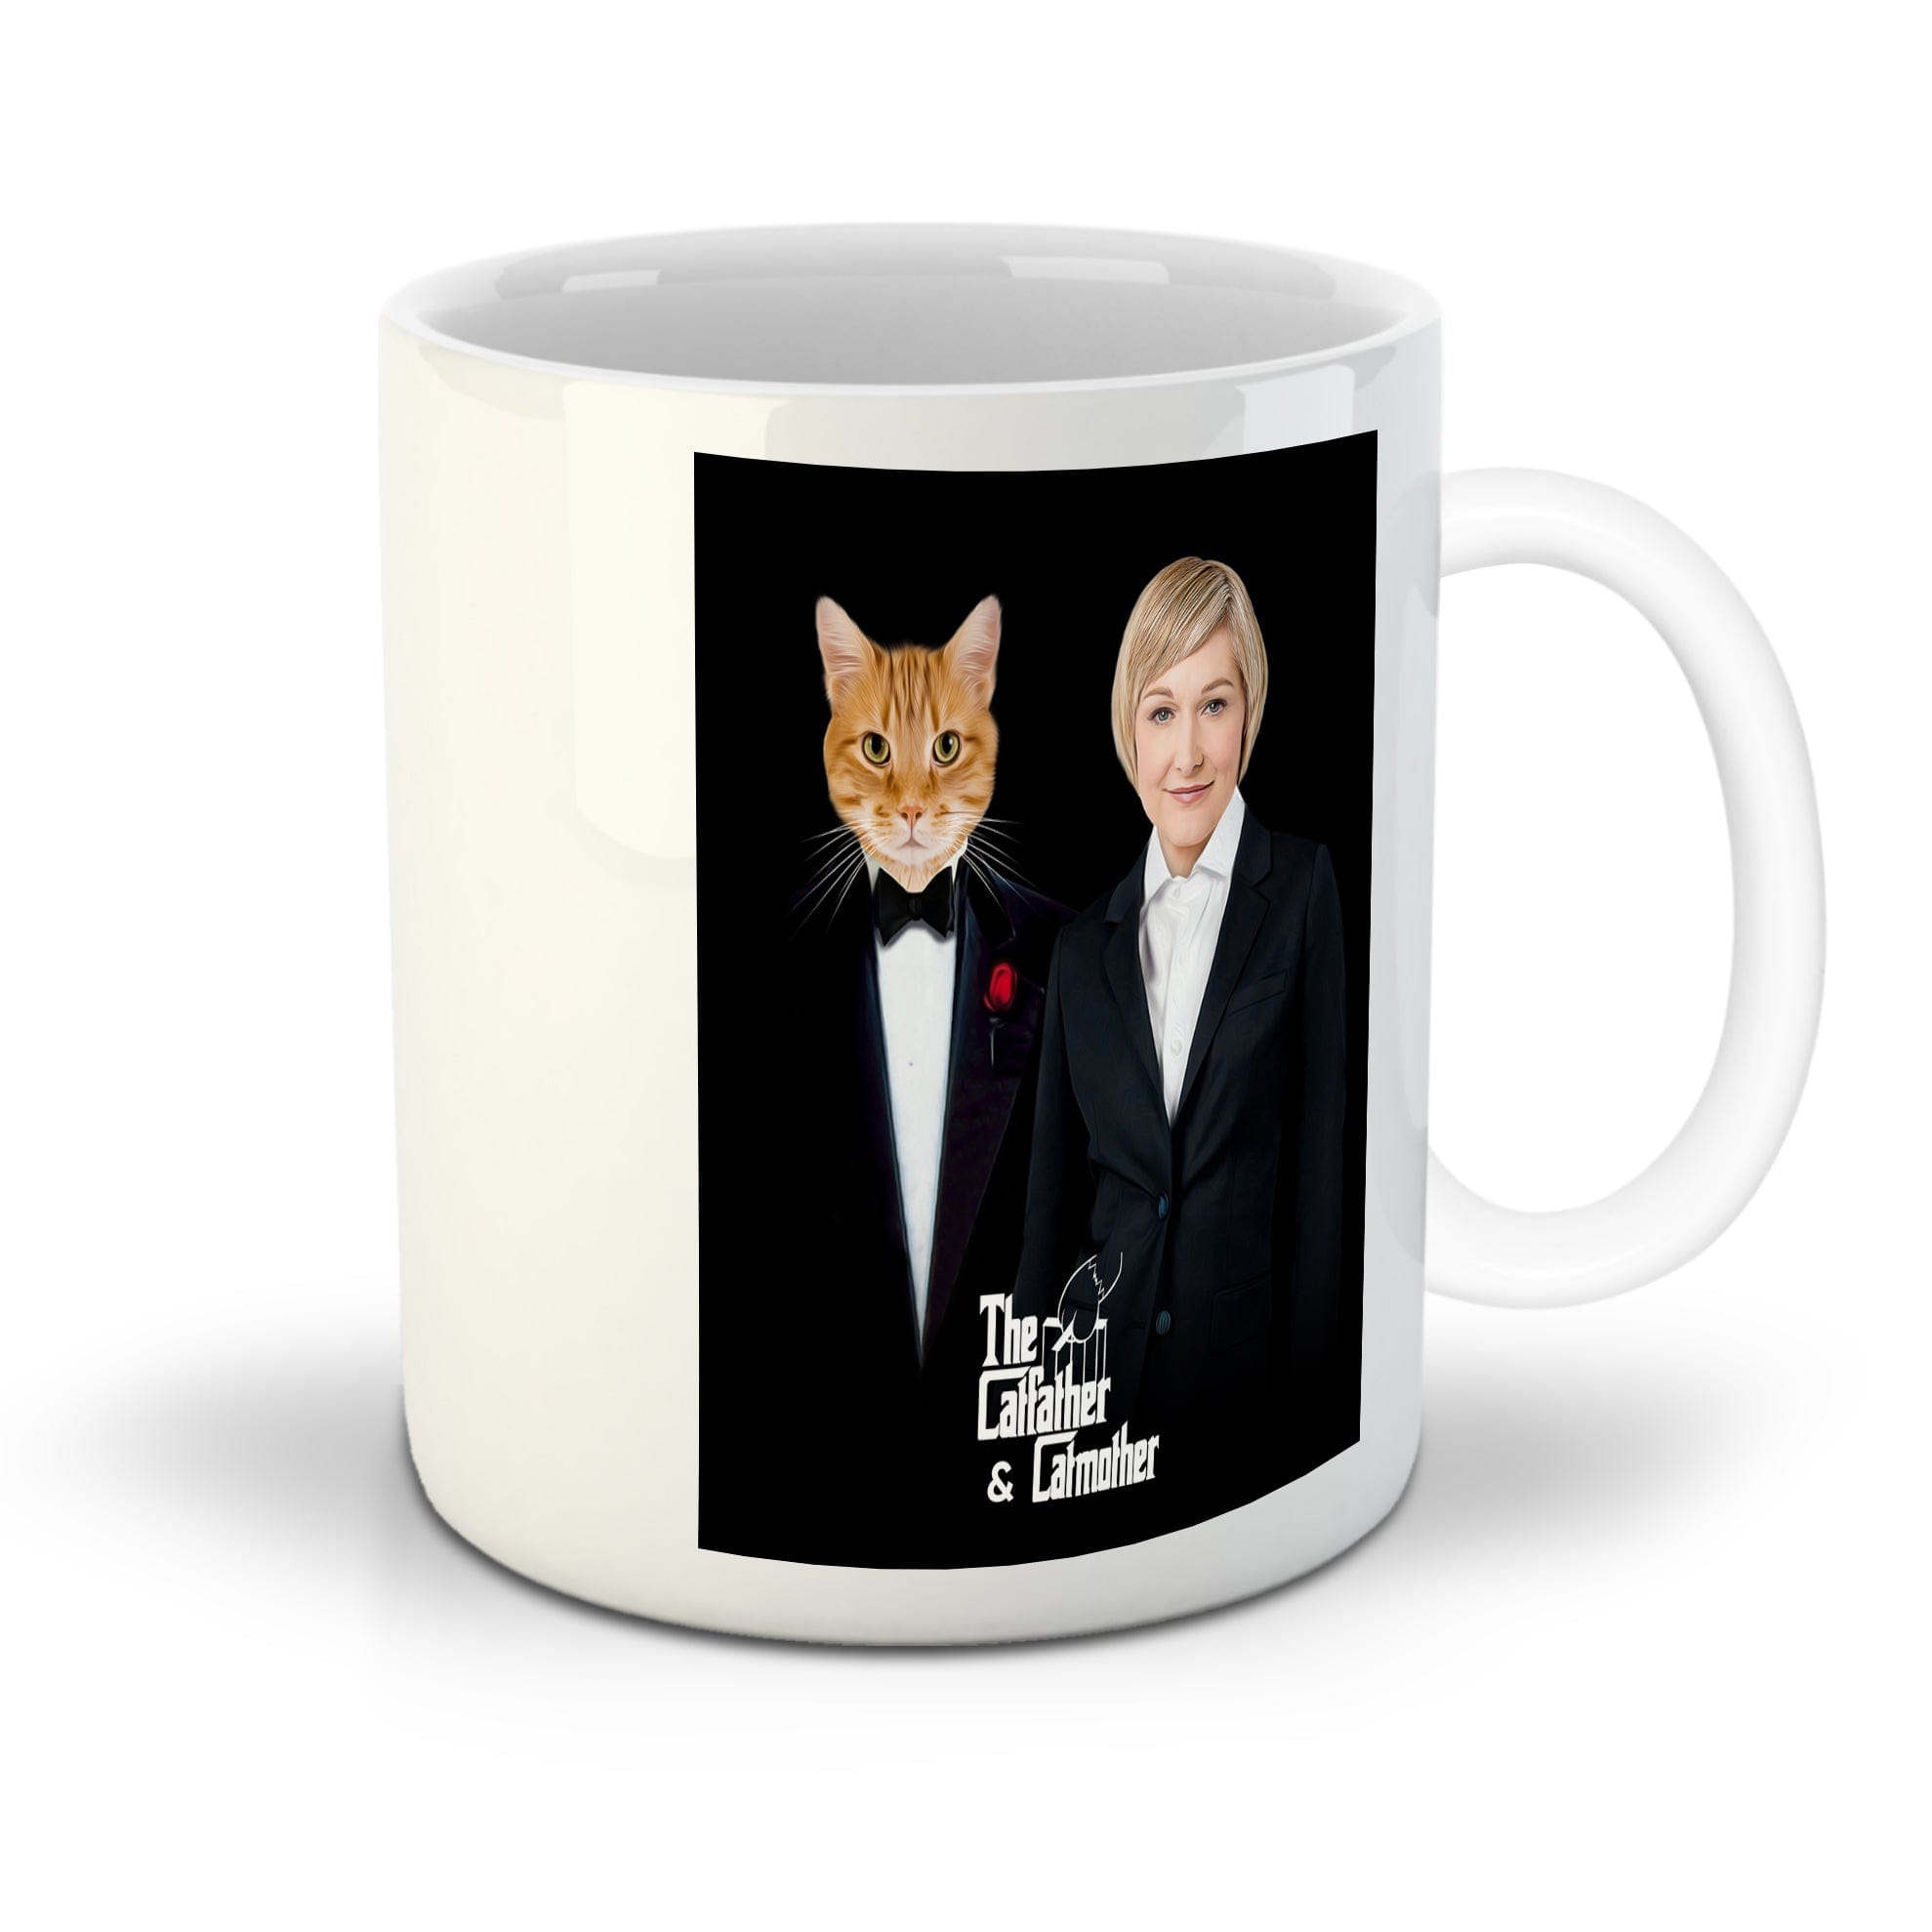 &#39;The Catfather &amp; Catmother&#39; Personalized Mug